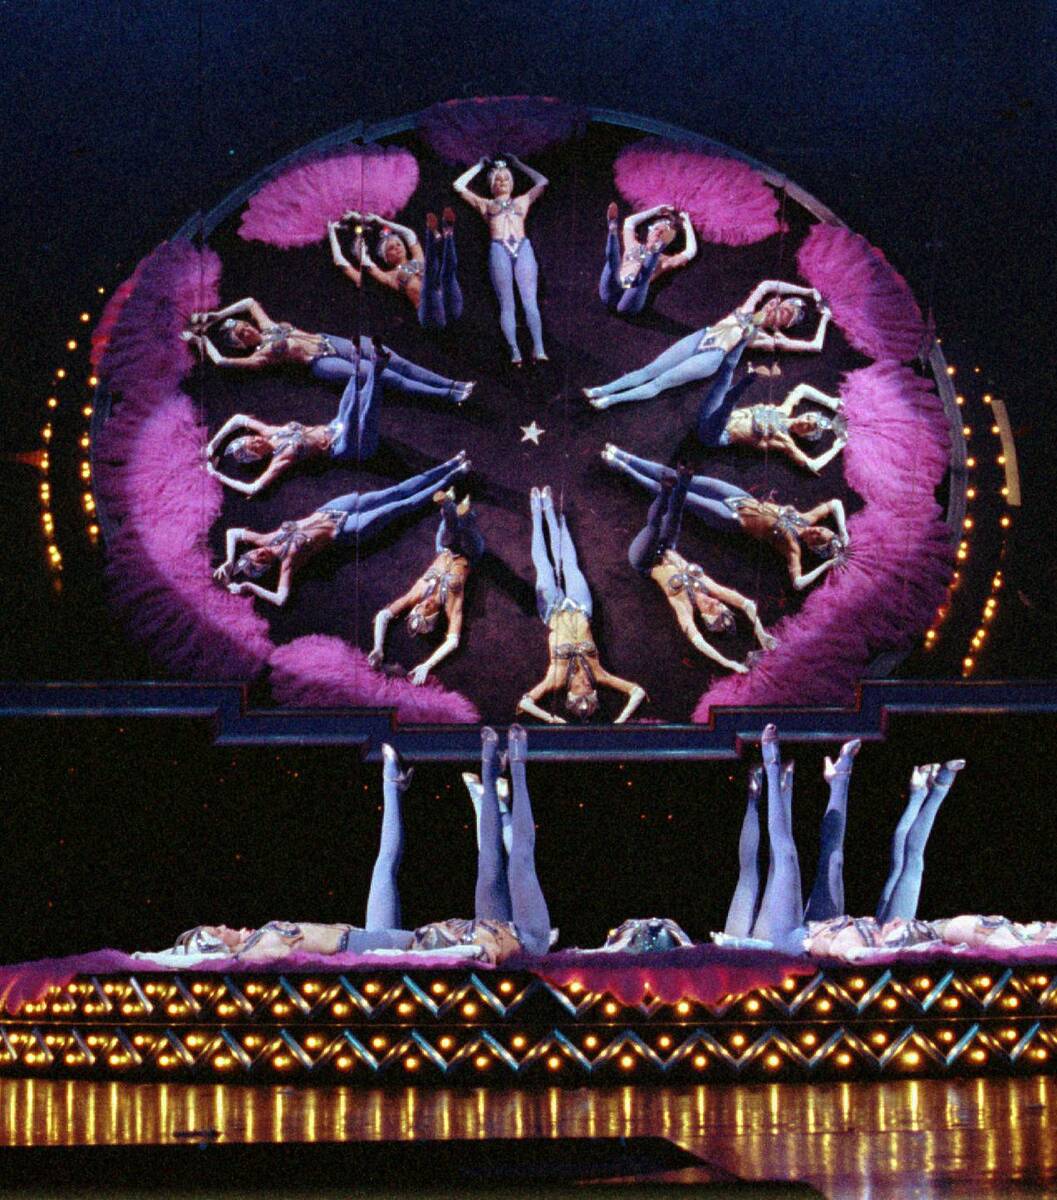 ** FILE ** In this April 14, 1997 file photo, showgirls perform one of their acts during a dres ...